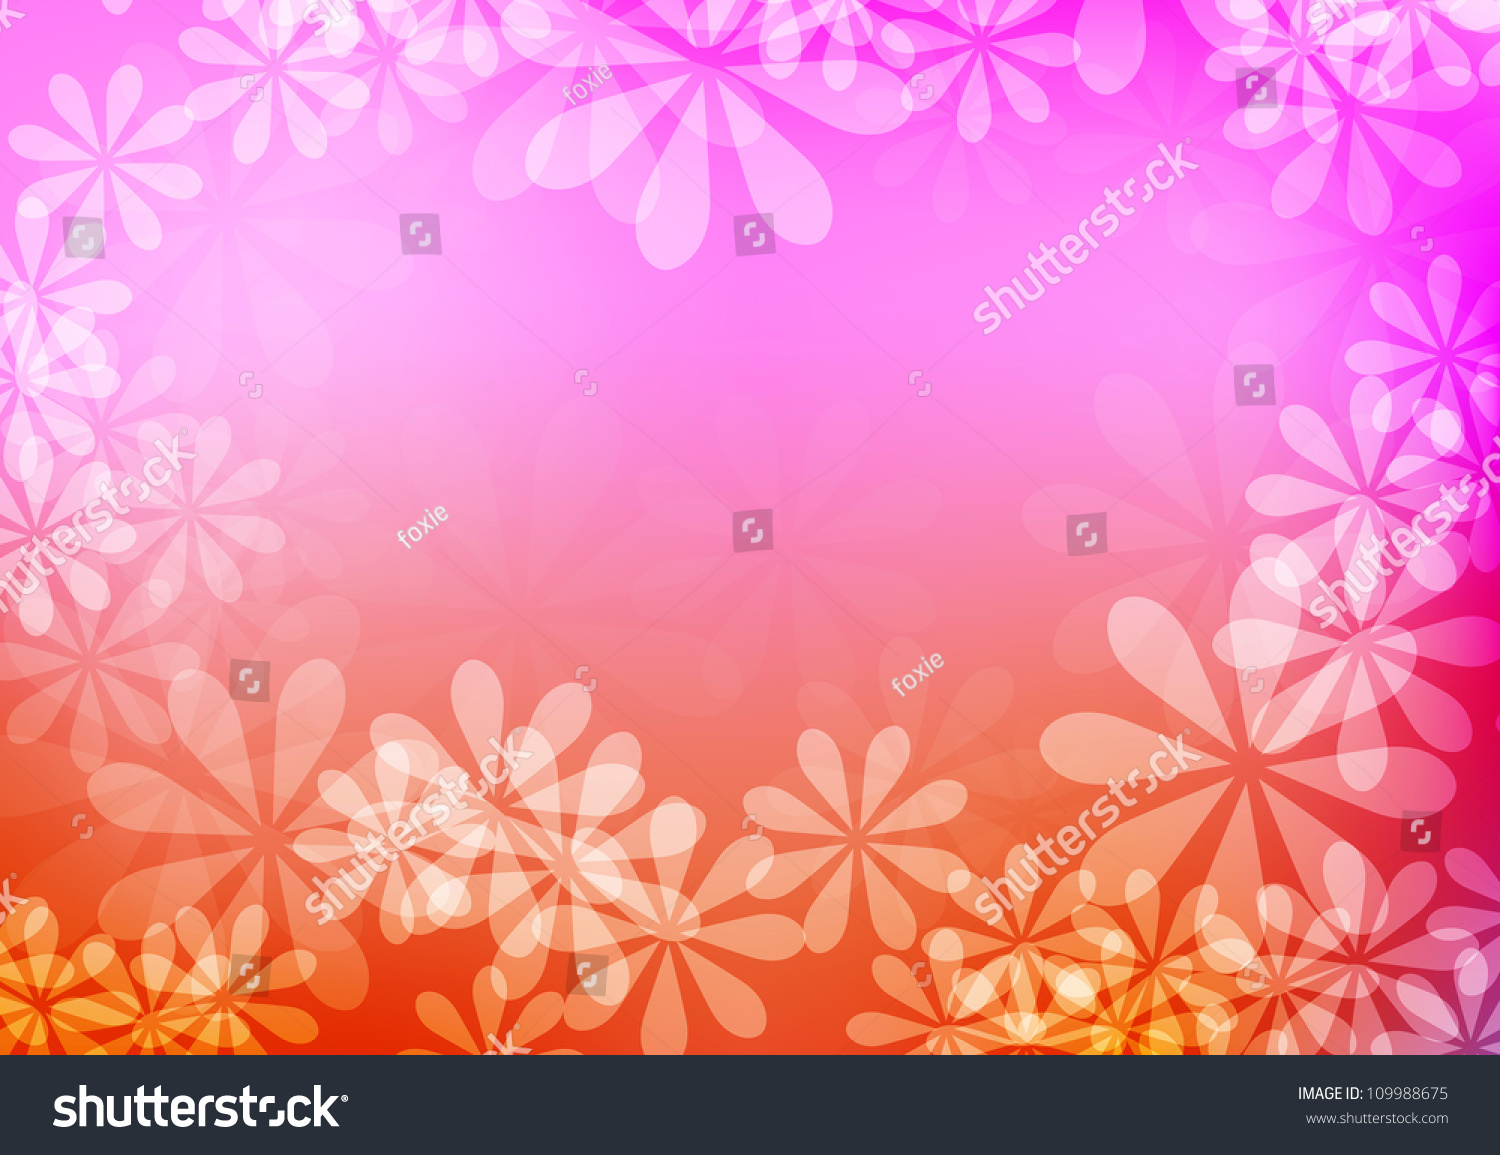 Abstract Warm Floral Subtle Soft Background - Raster Version Stock Photo 109988675 : Shutterstock